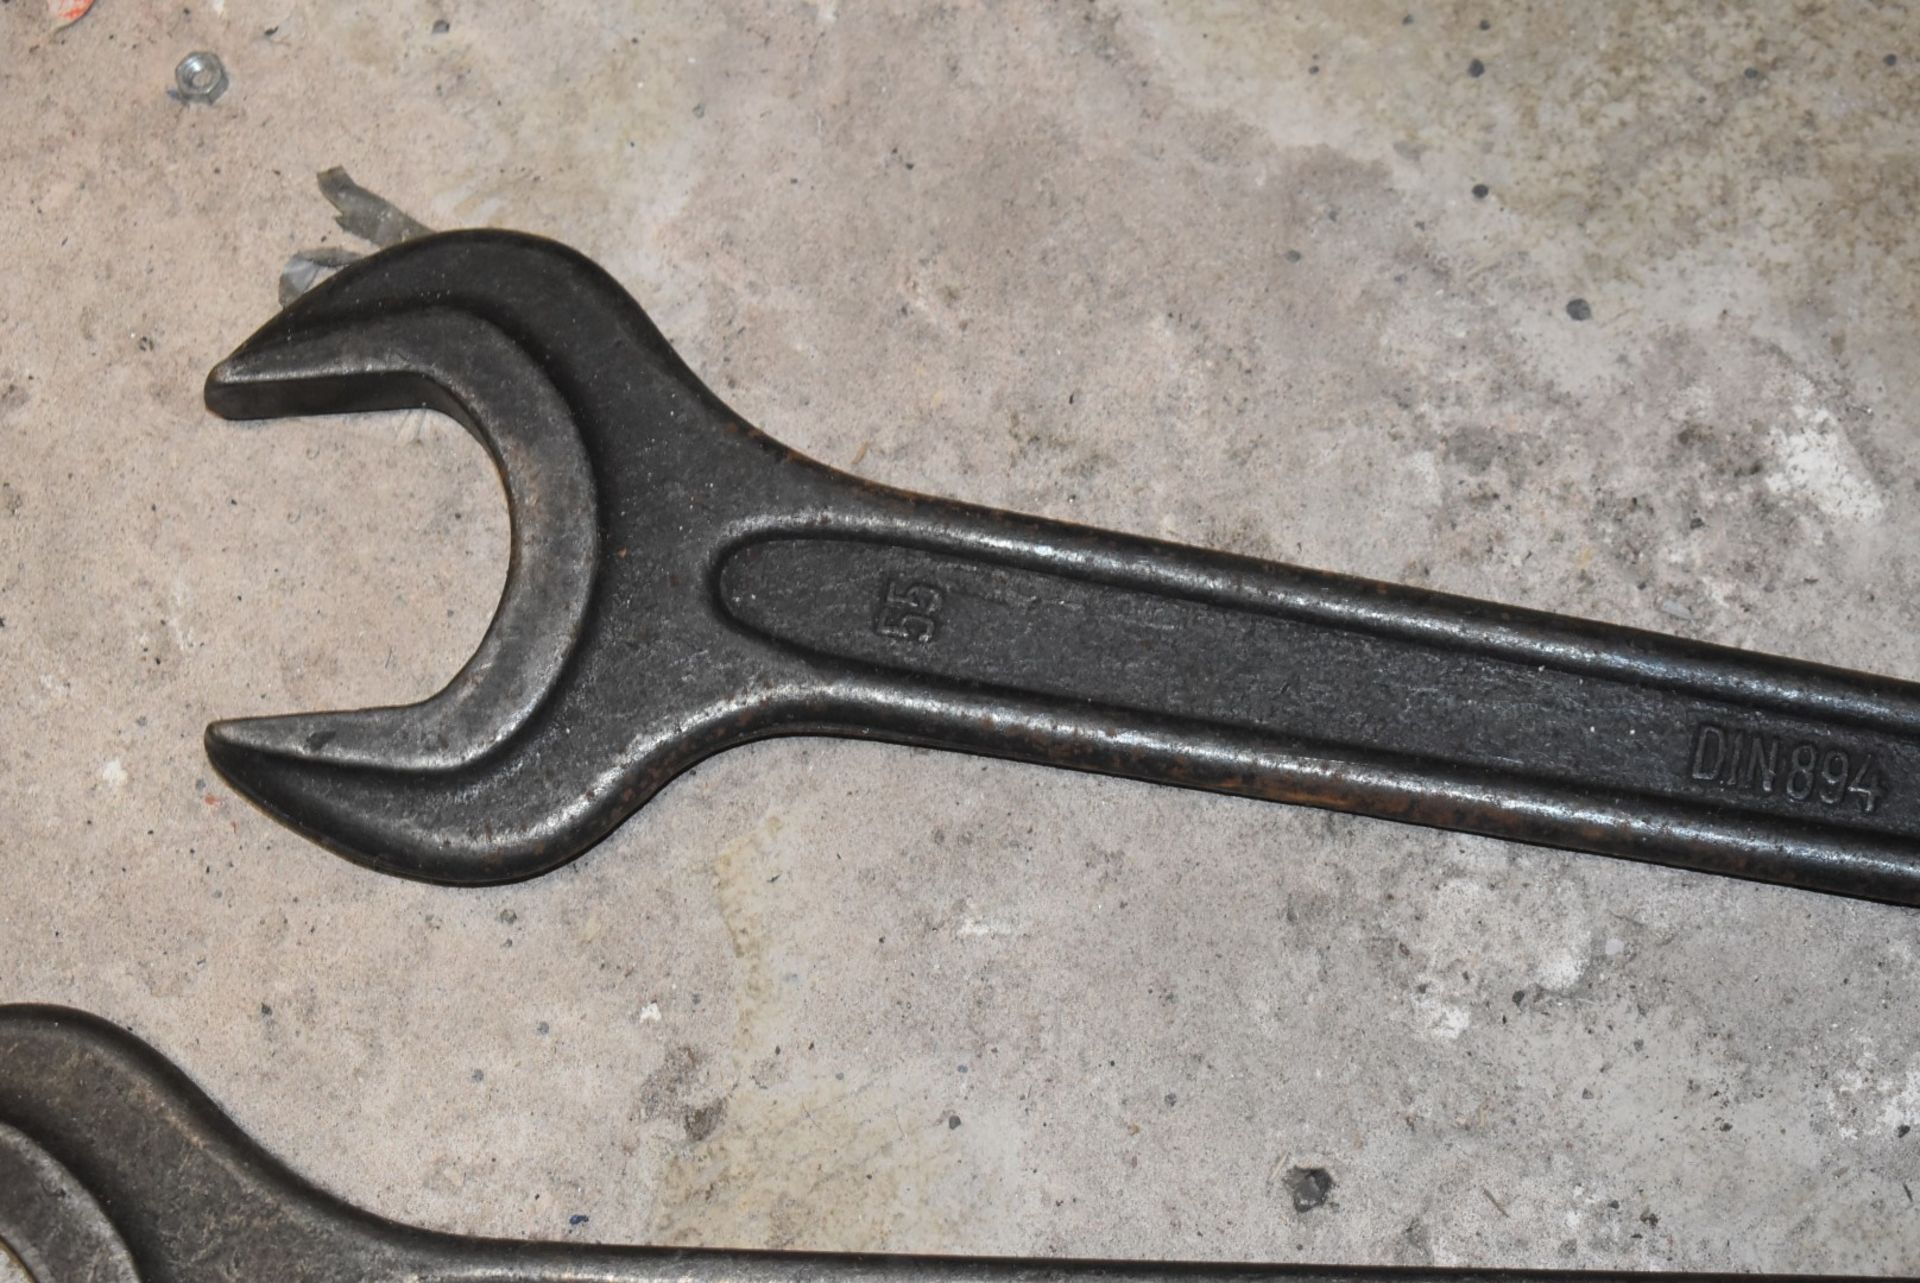 3 x Large Industrial Spanners - Image 3 of 6